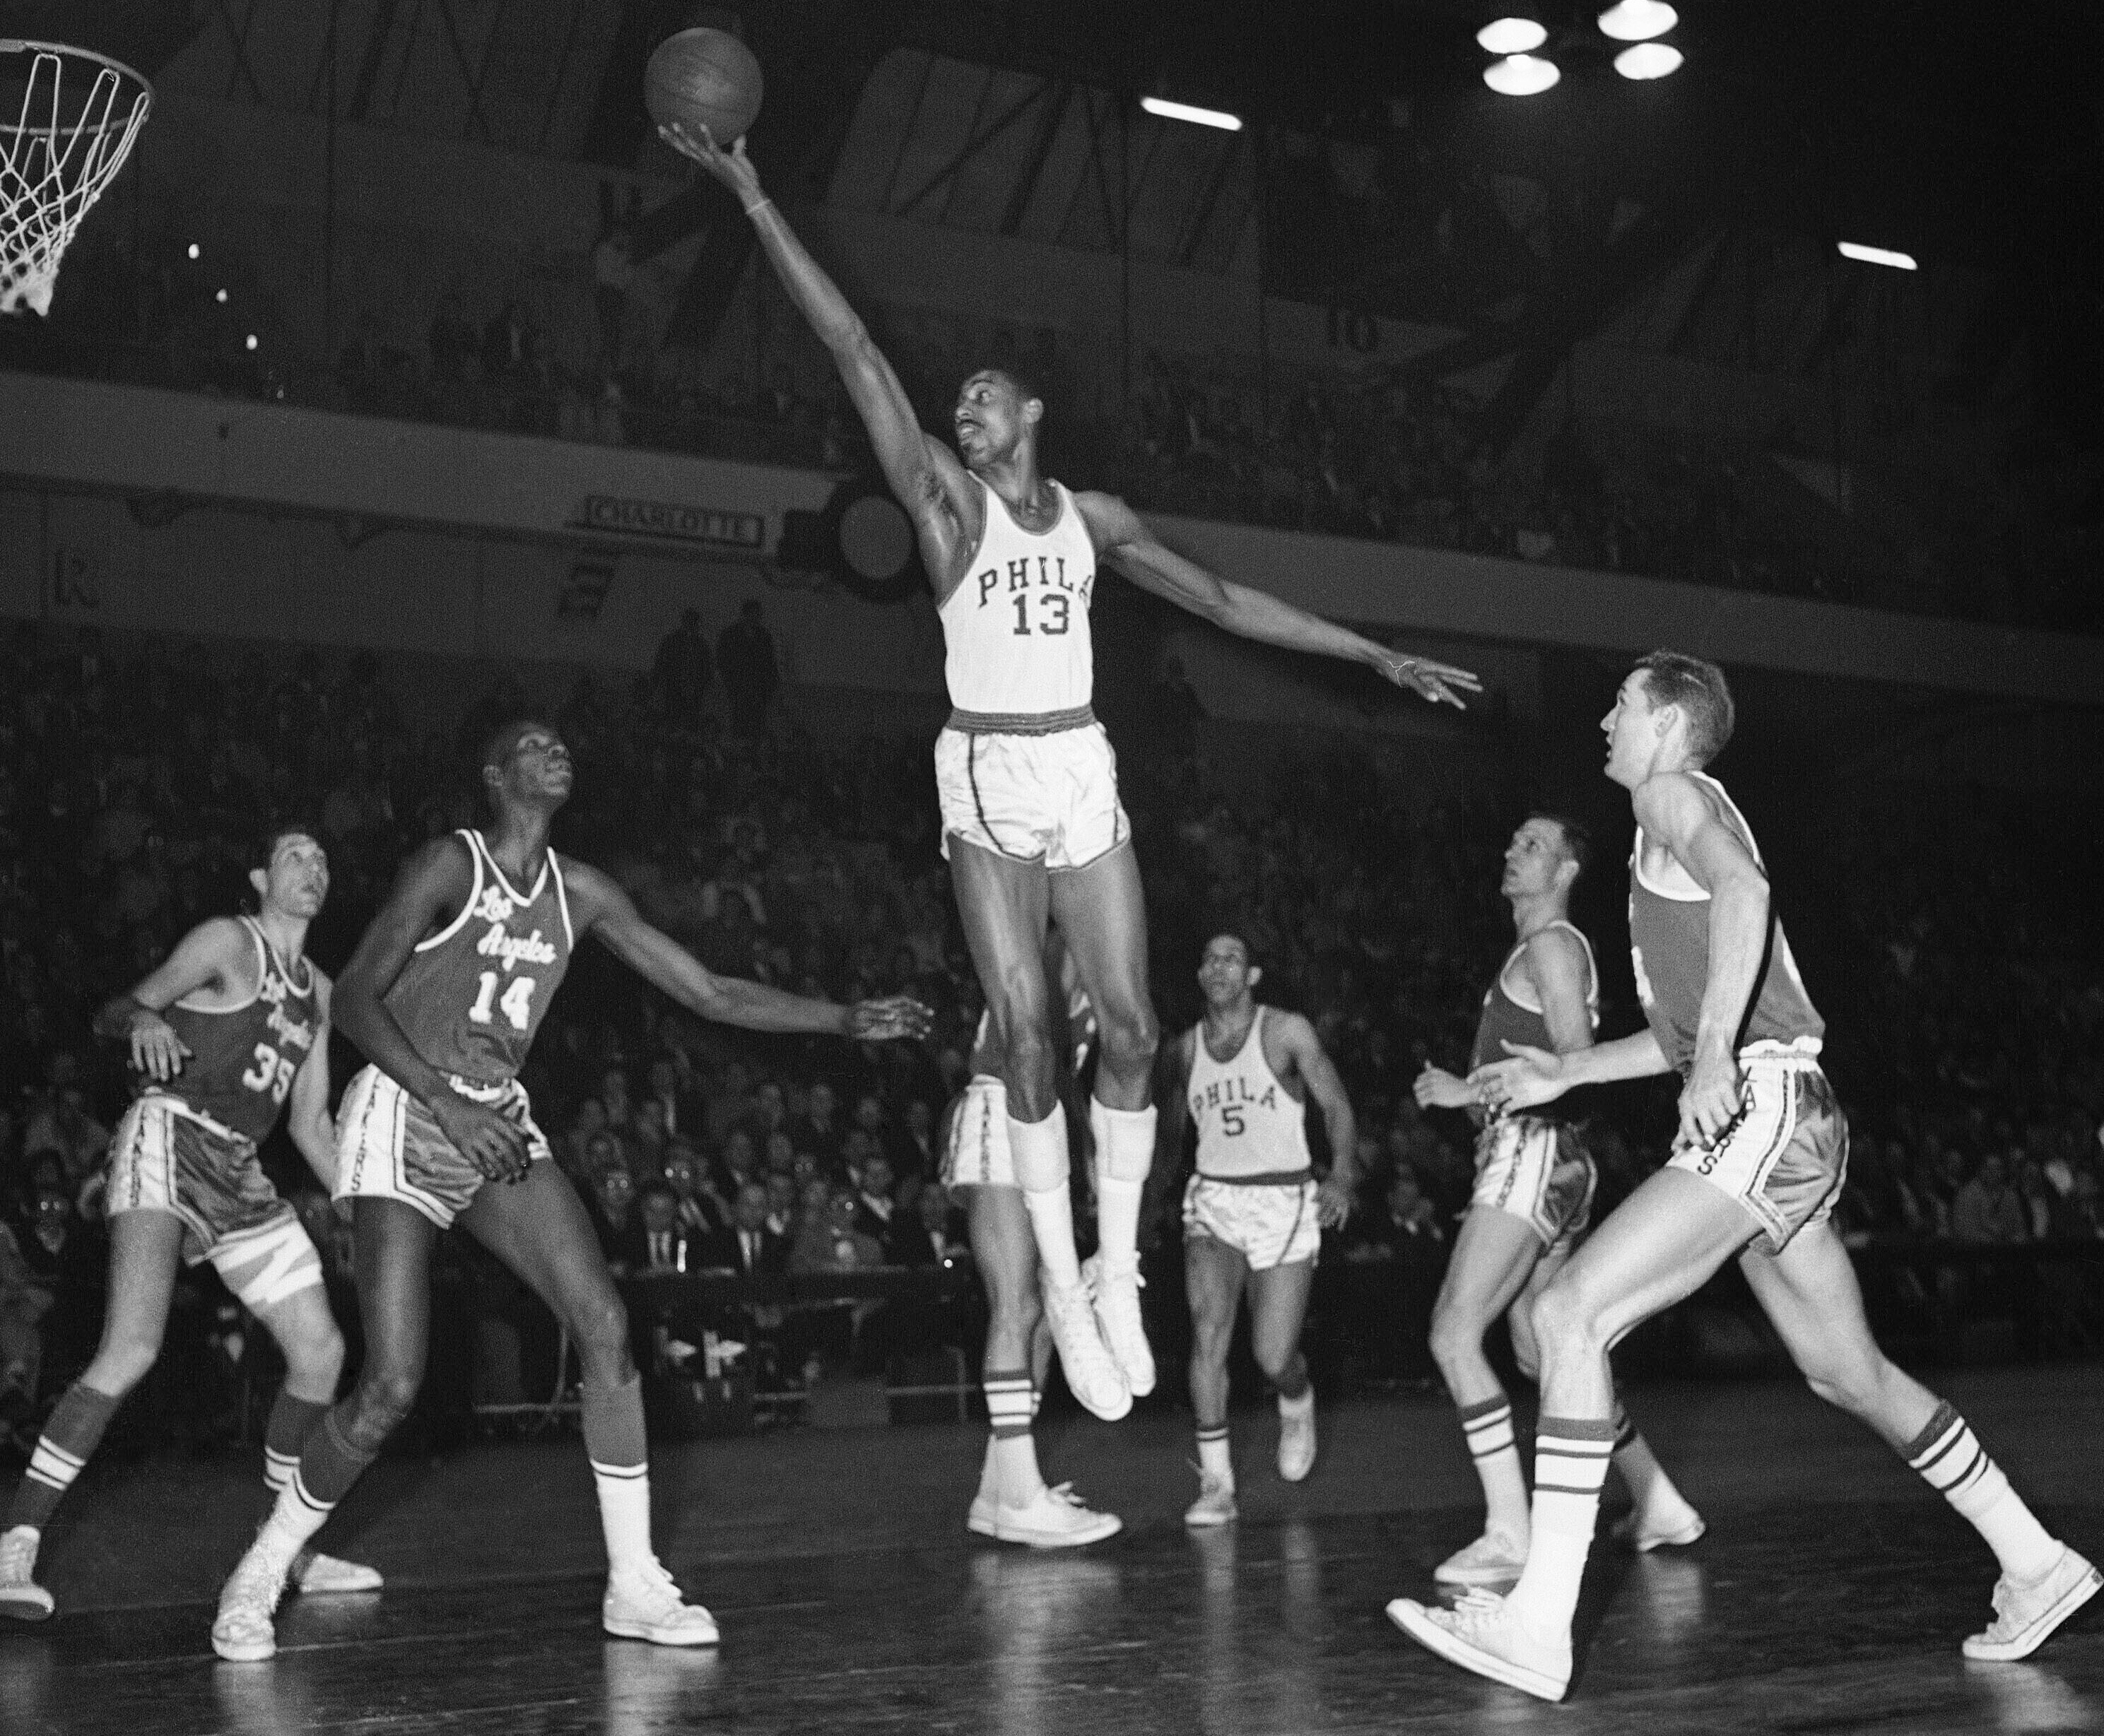 From 'bottom of totem pole,' NBA begins its climb in 1950s - The